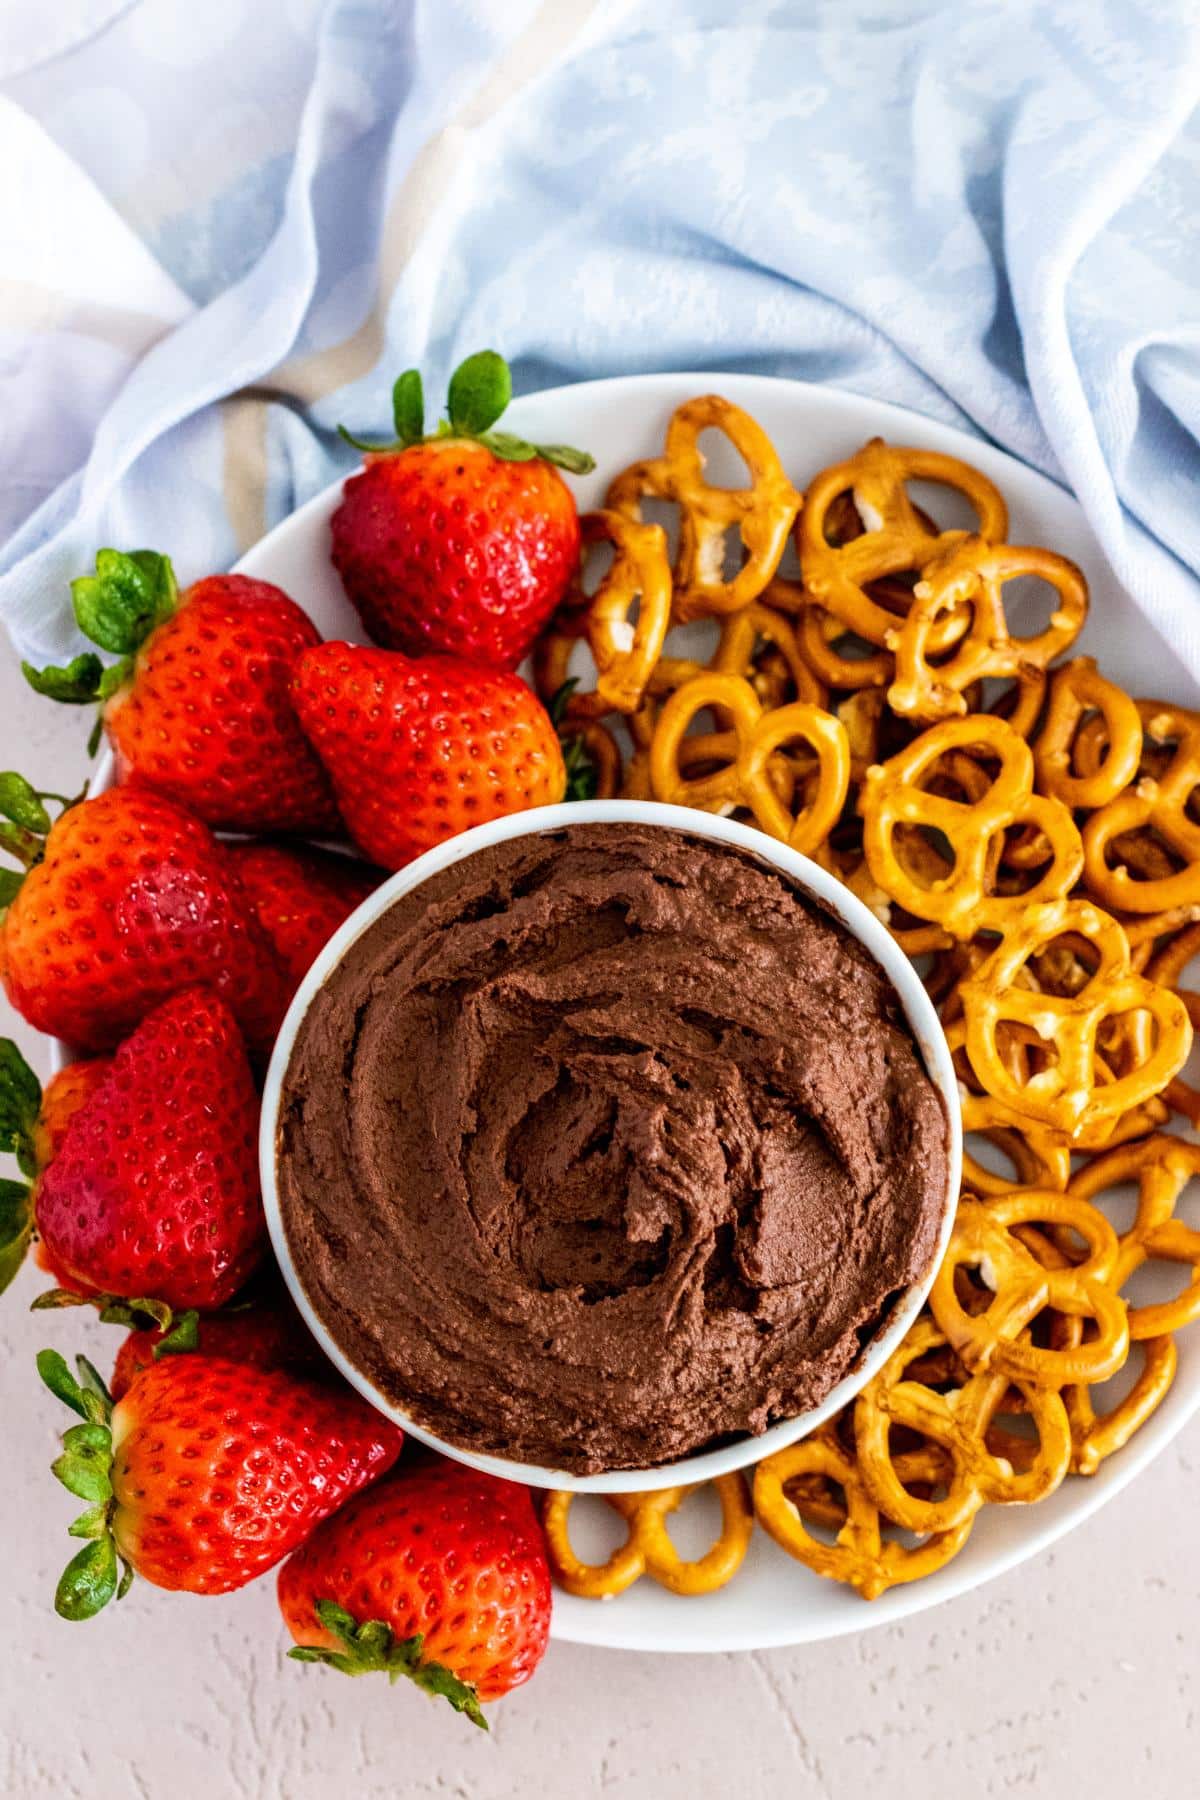 Platter with strawberries, bowl of chocolate hummus, and mini pretzels.